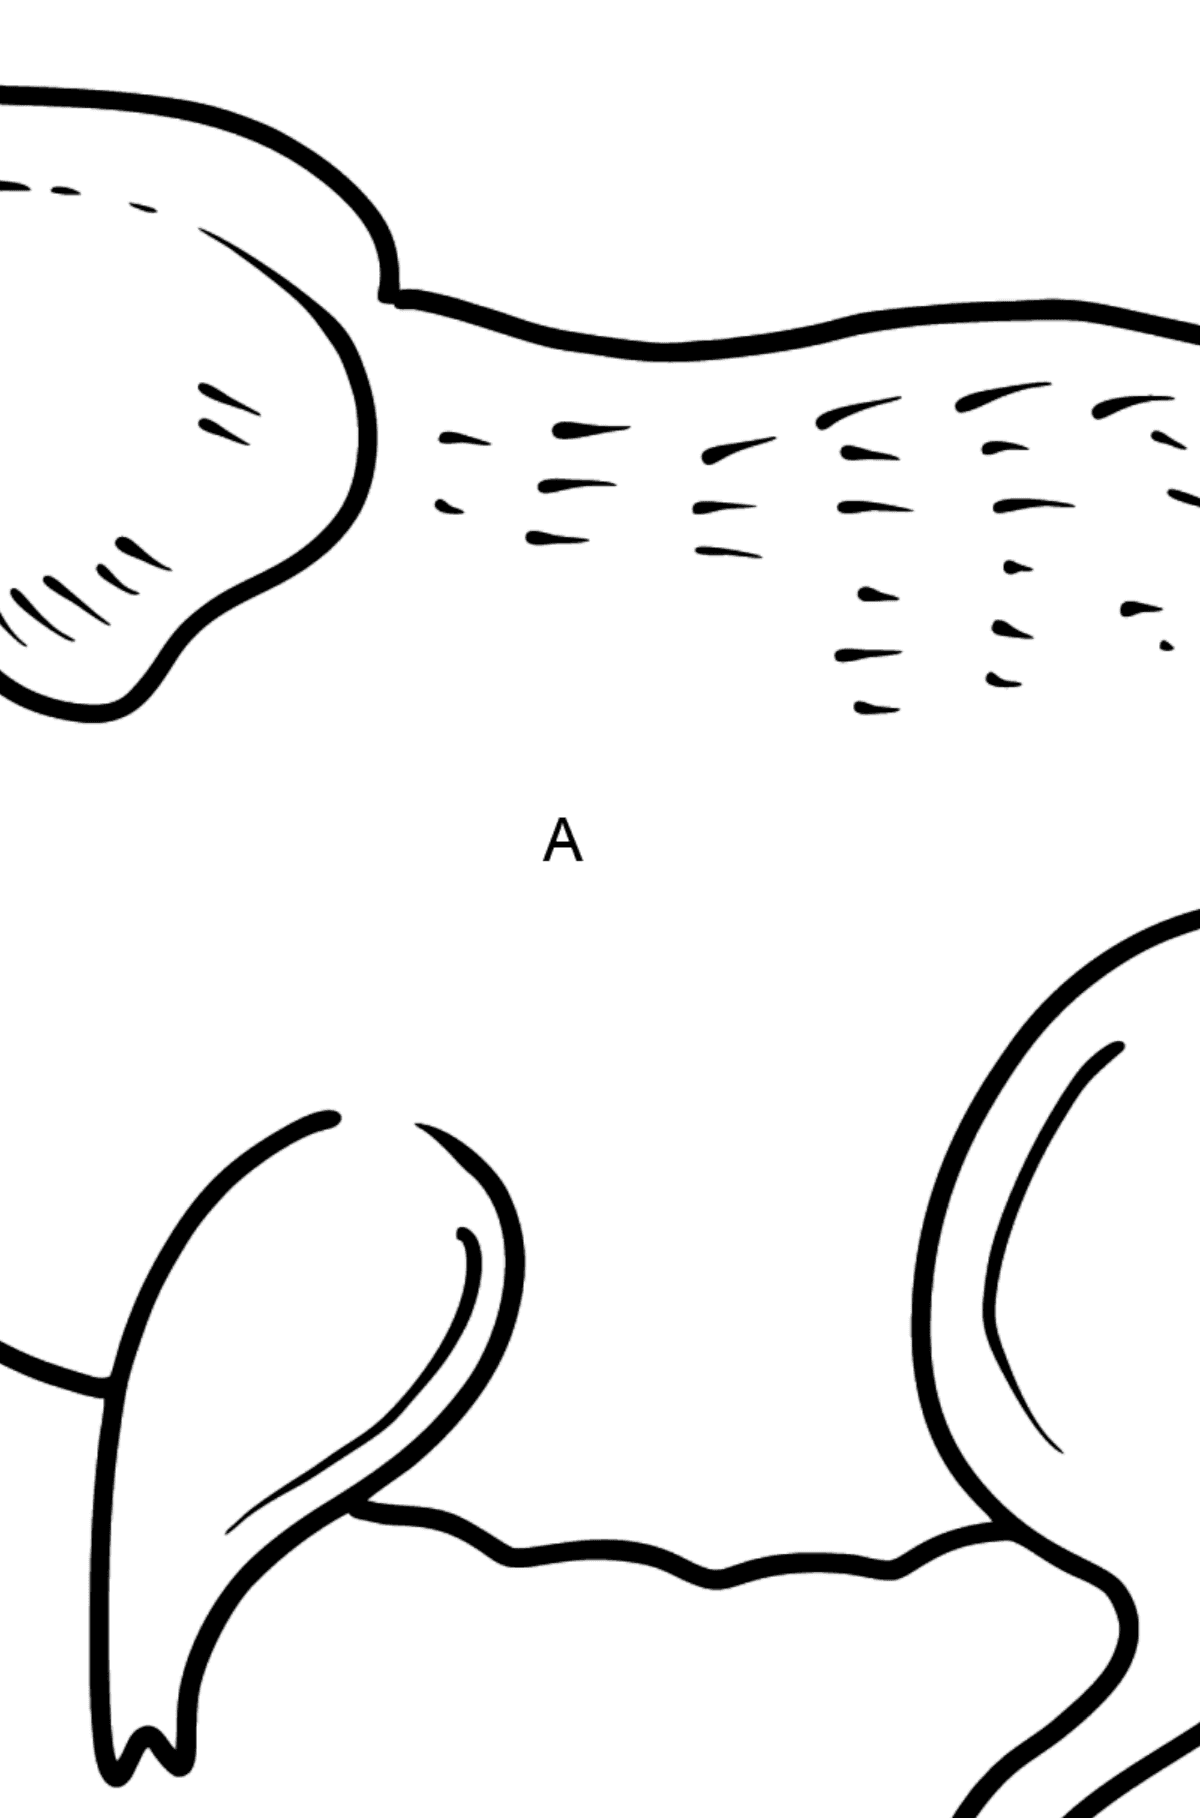 Pig coloring page - Coloring by Letters for Kids